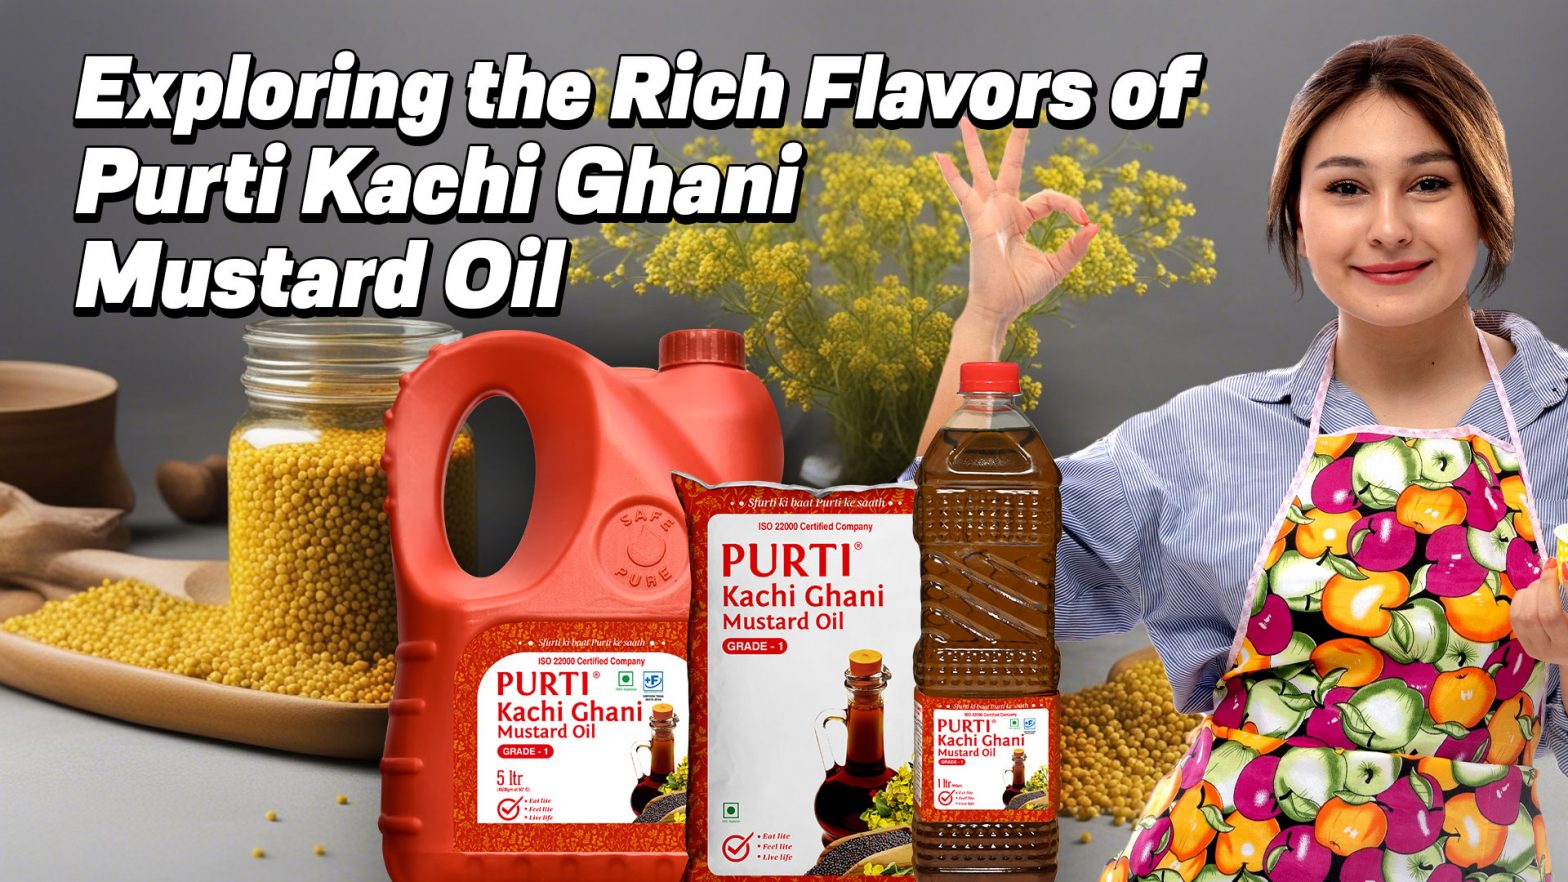 Exploring the Rich Flavors of Purti Kachi Ghani Mustard Oil